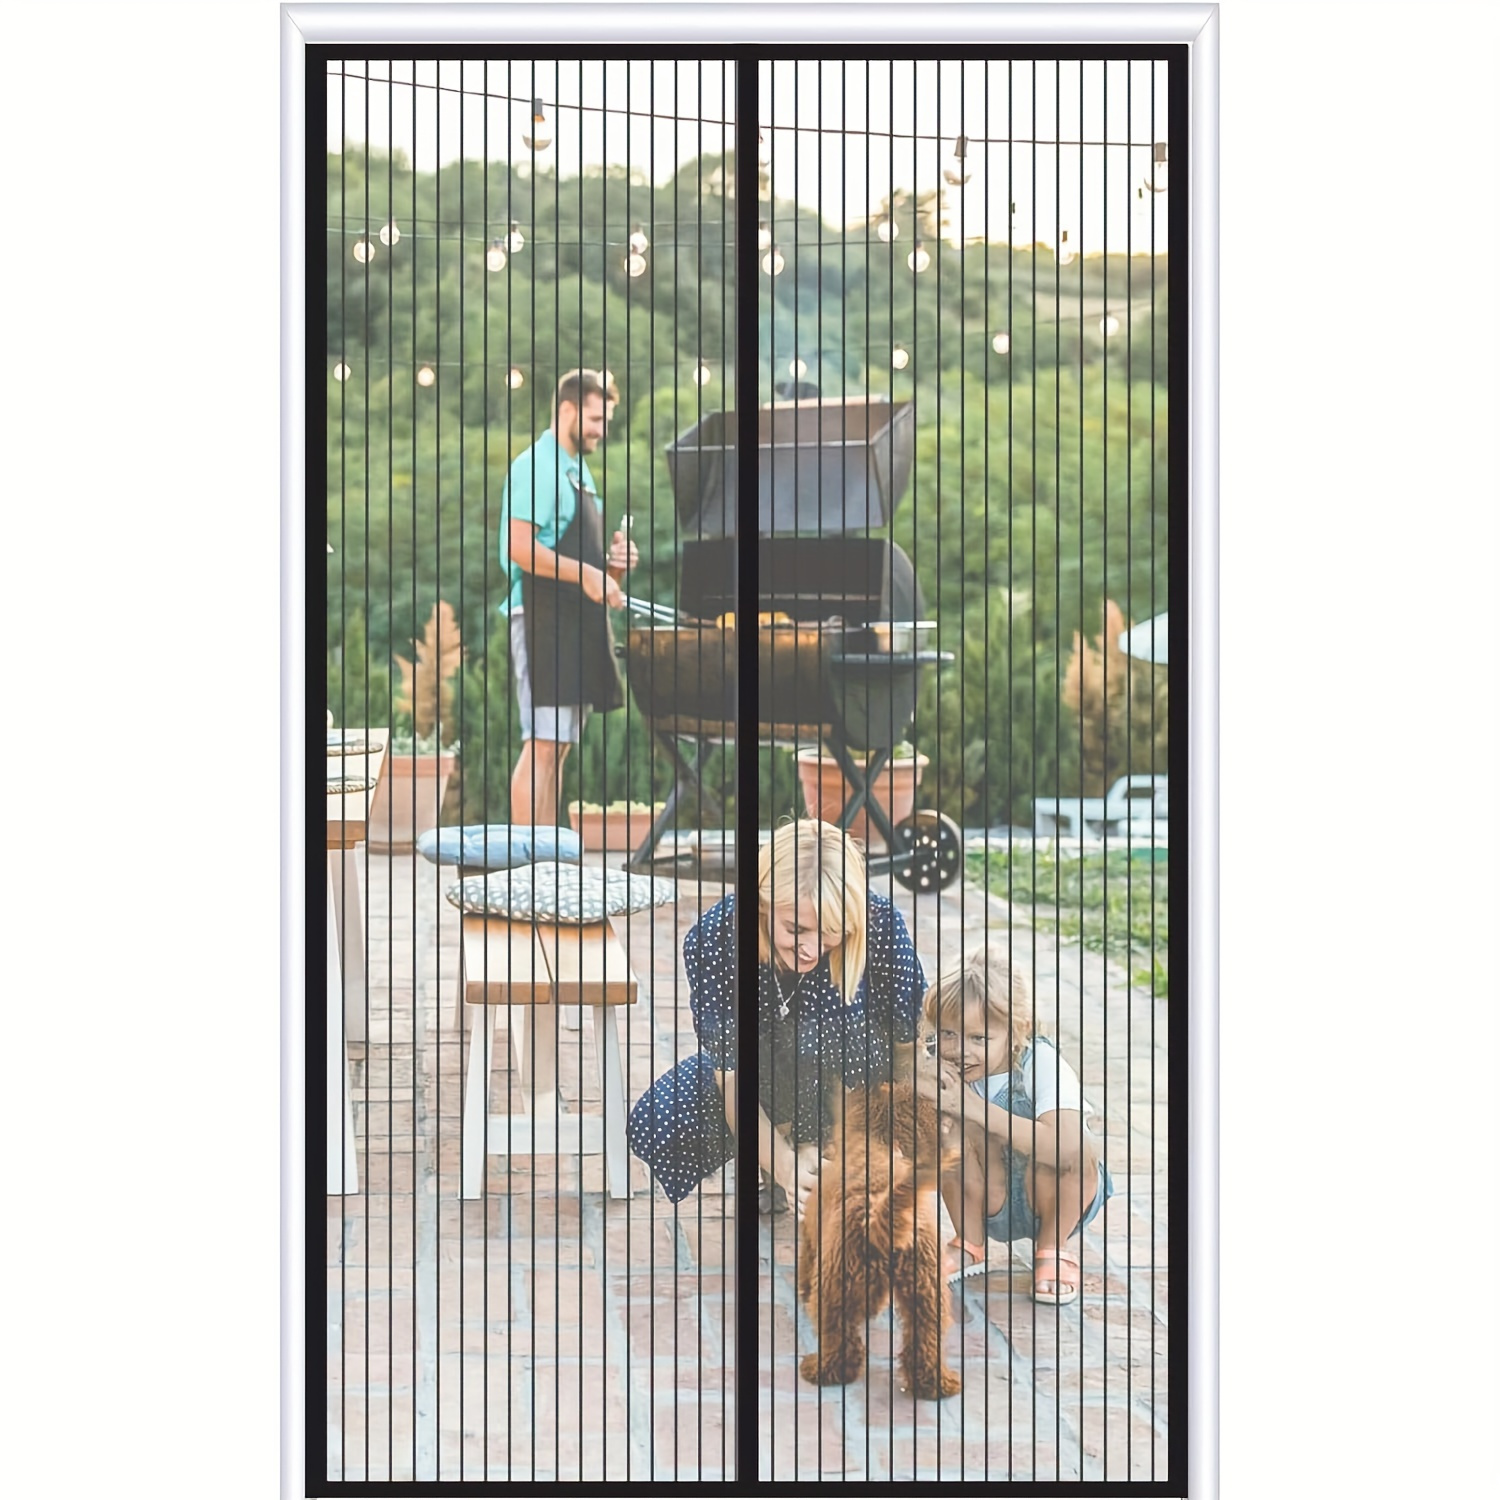 

Easy-install Magnetic Screen Door Kit - Heavy-duty Mesh, No-hands Entry, Powerful Magnets For Sliding Doors - Perfect For Front, Back, Patio & Apartment